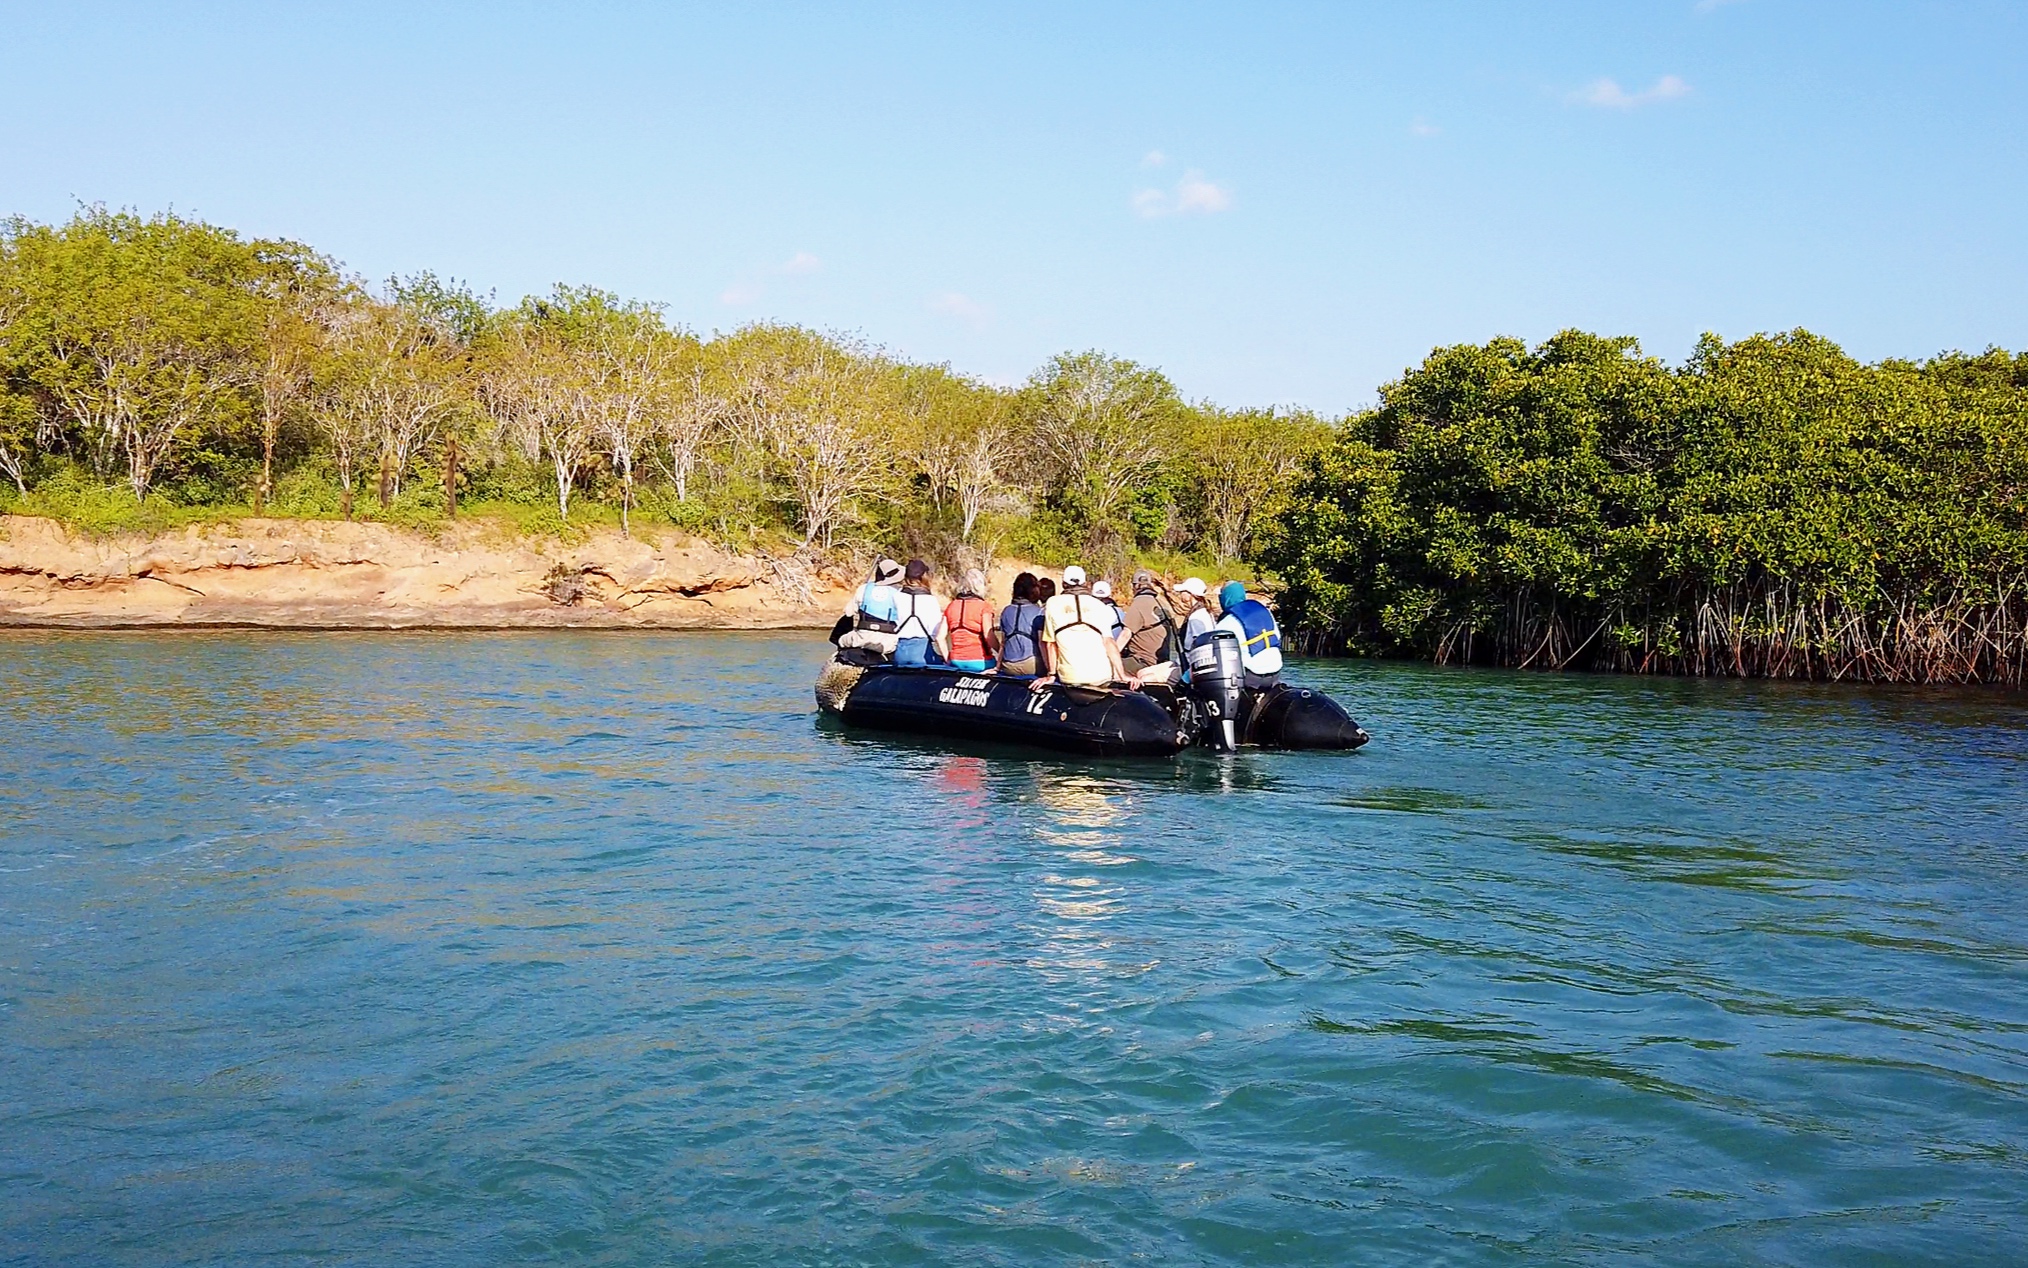  This afternoons zodiac cruise around the mangrove lagoons - a nursery for baby sharks. 